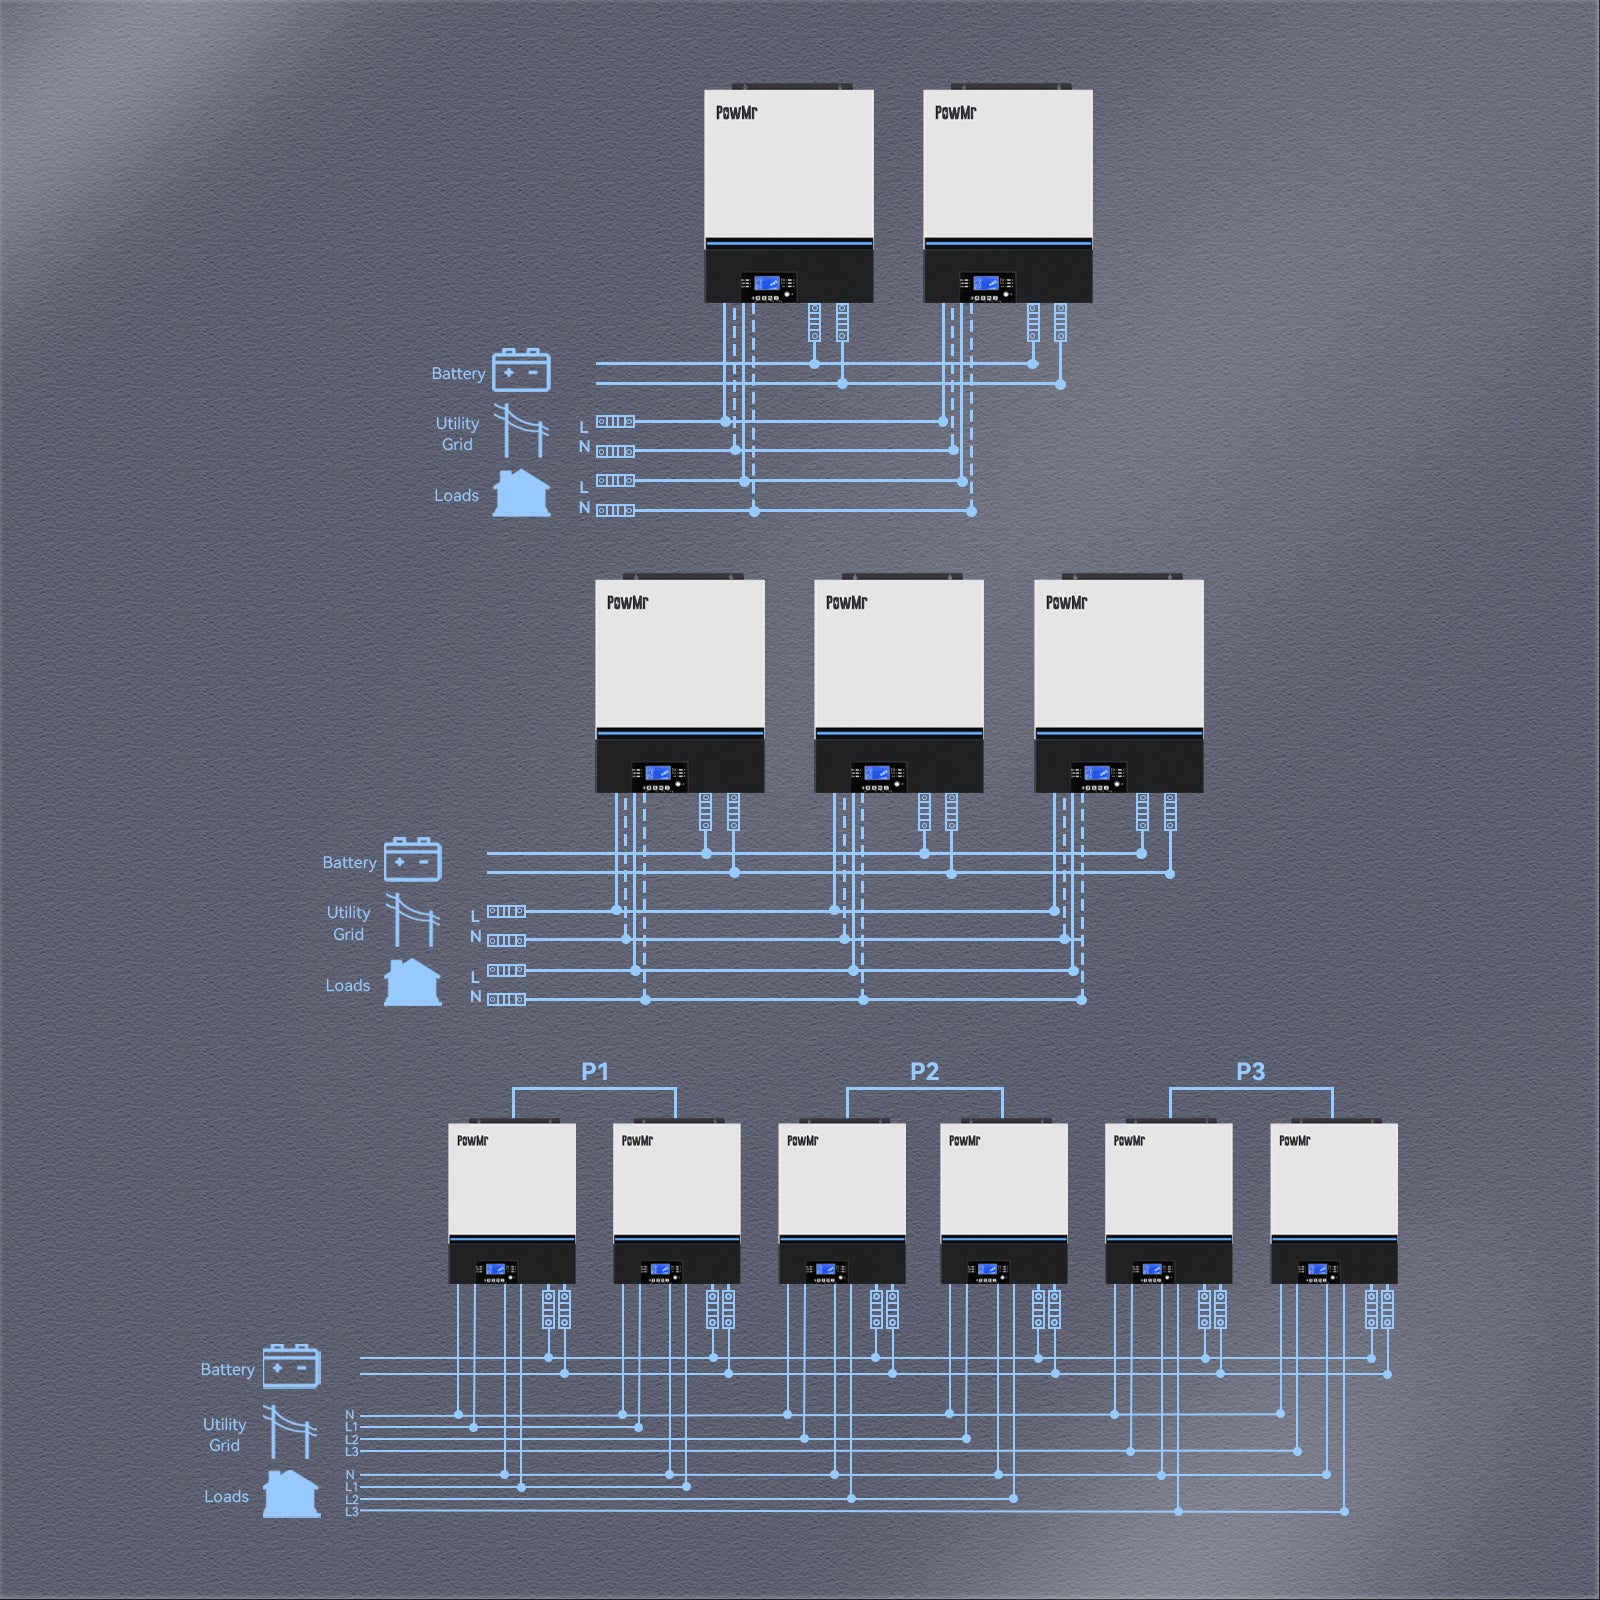 8kw inverter supports up to 6 units in prallel connection